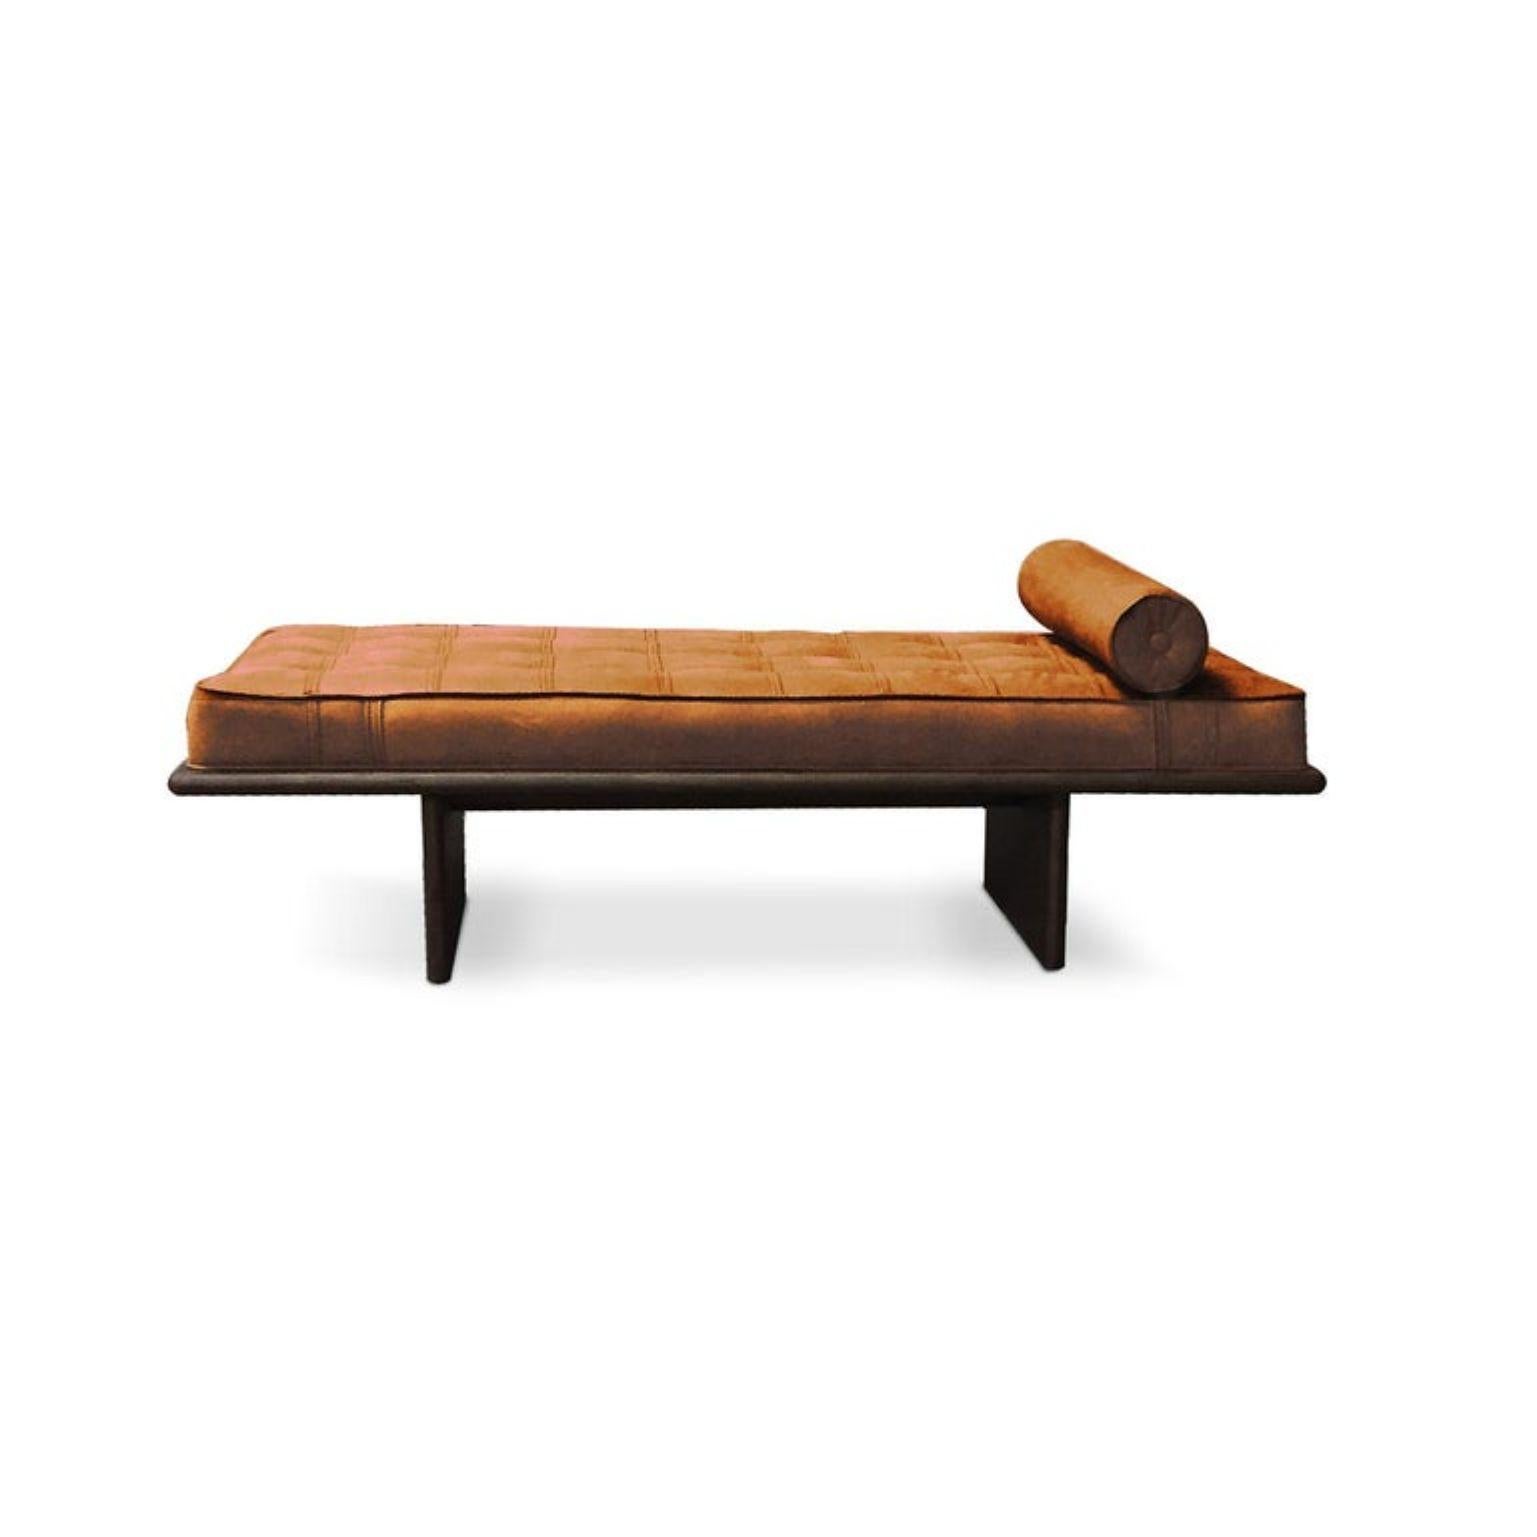 Frederic daybed by Collector
Materials: Structure in solid oak wood. Upholstered in genuine Sequoia 4003 leather.
Dimensions: W 190 x D 90 x H 50 cm.

Frederic daybed it’s inspired by Japanese minimalism. With simple and clean structure,